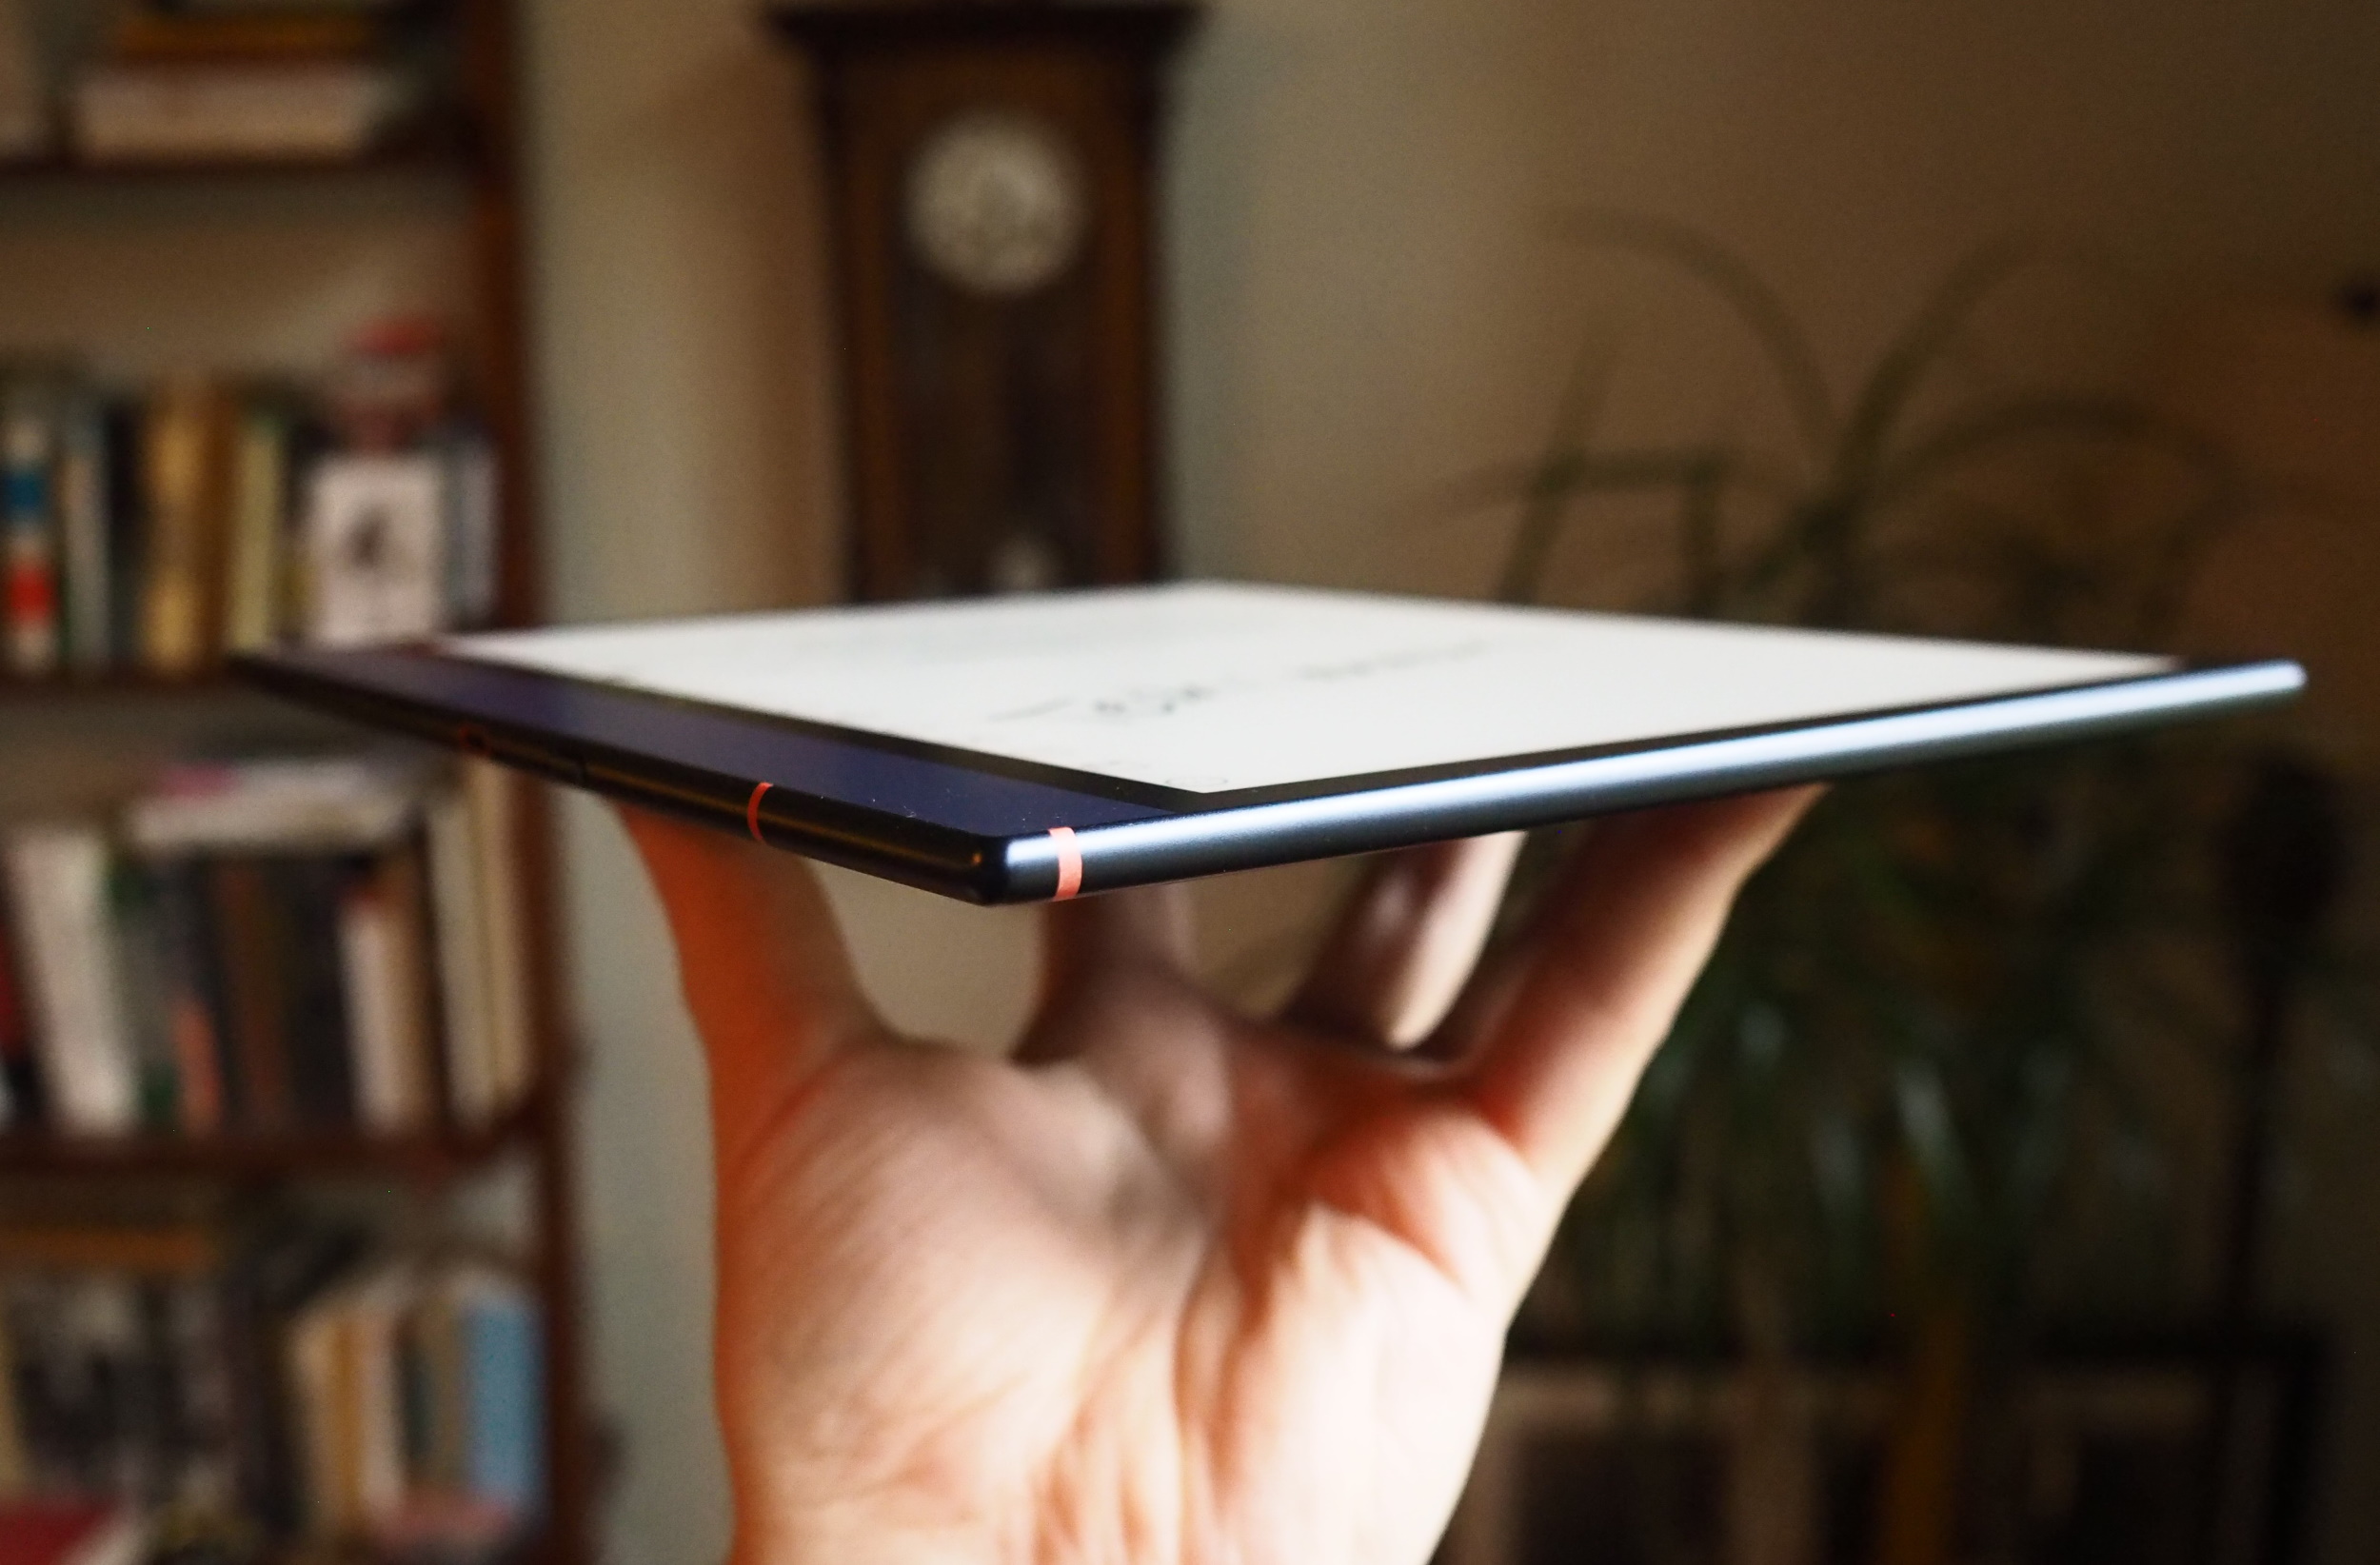 Side view of a tablet showing its thin profile and metal finish.